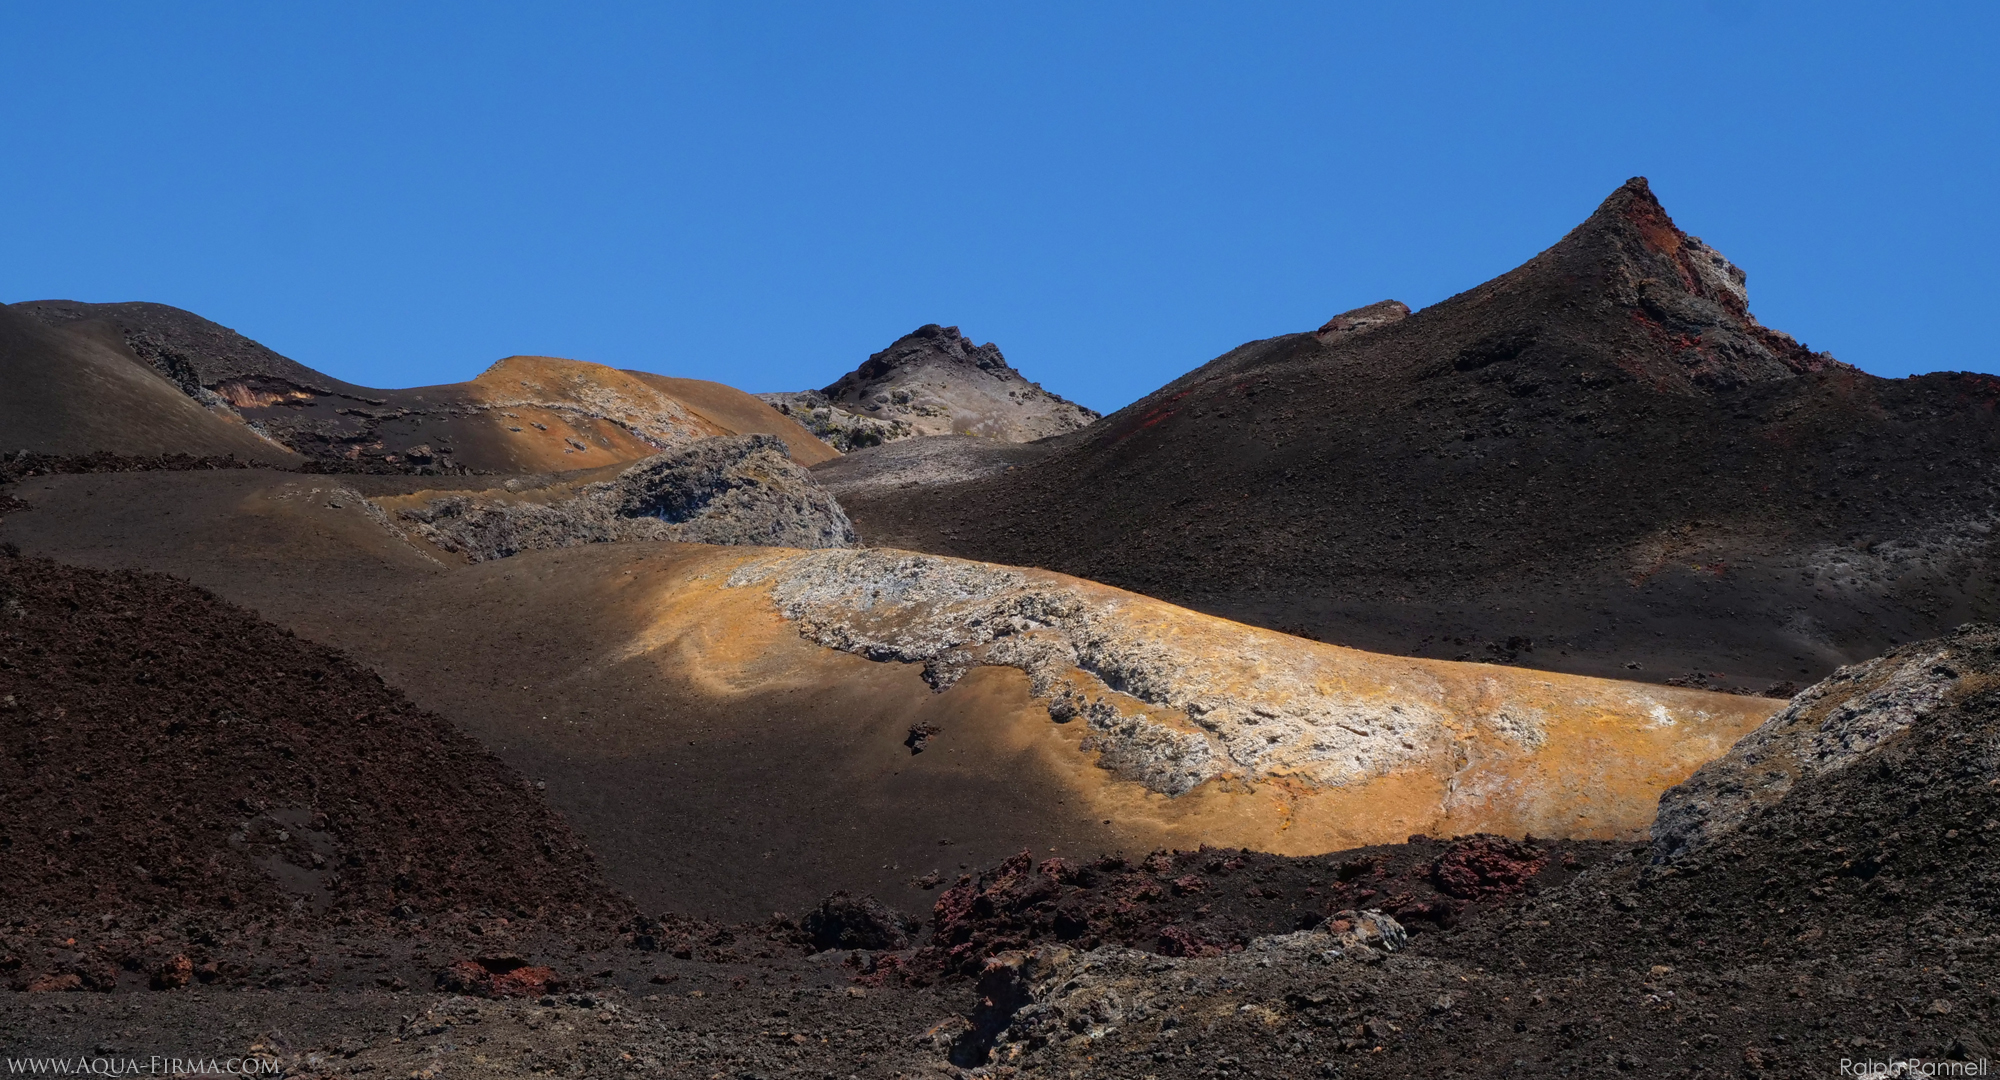 Galapagos Volcanic Landscapes Trekking Photography